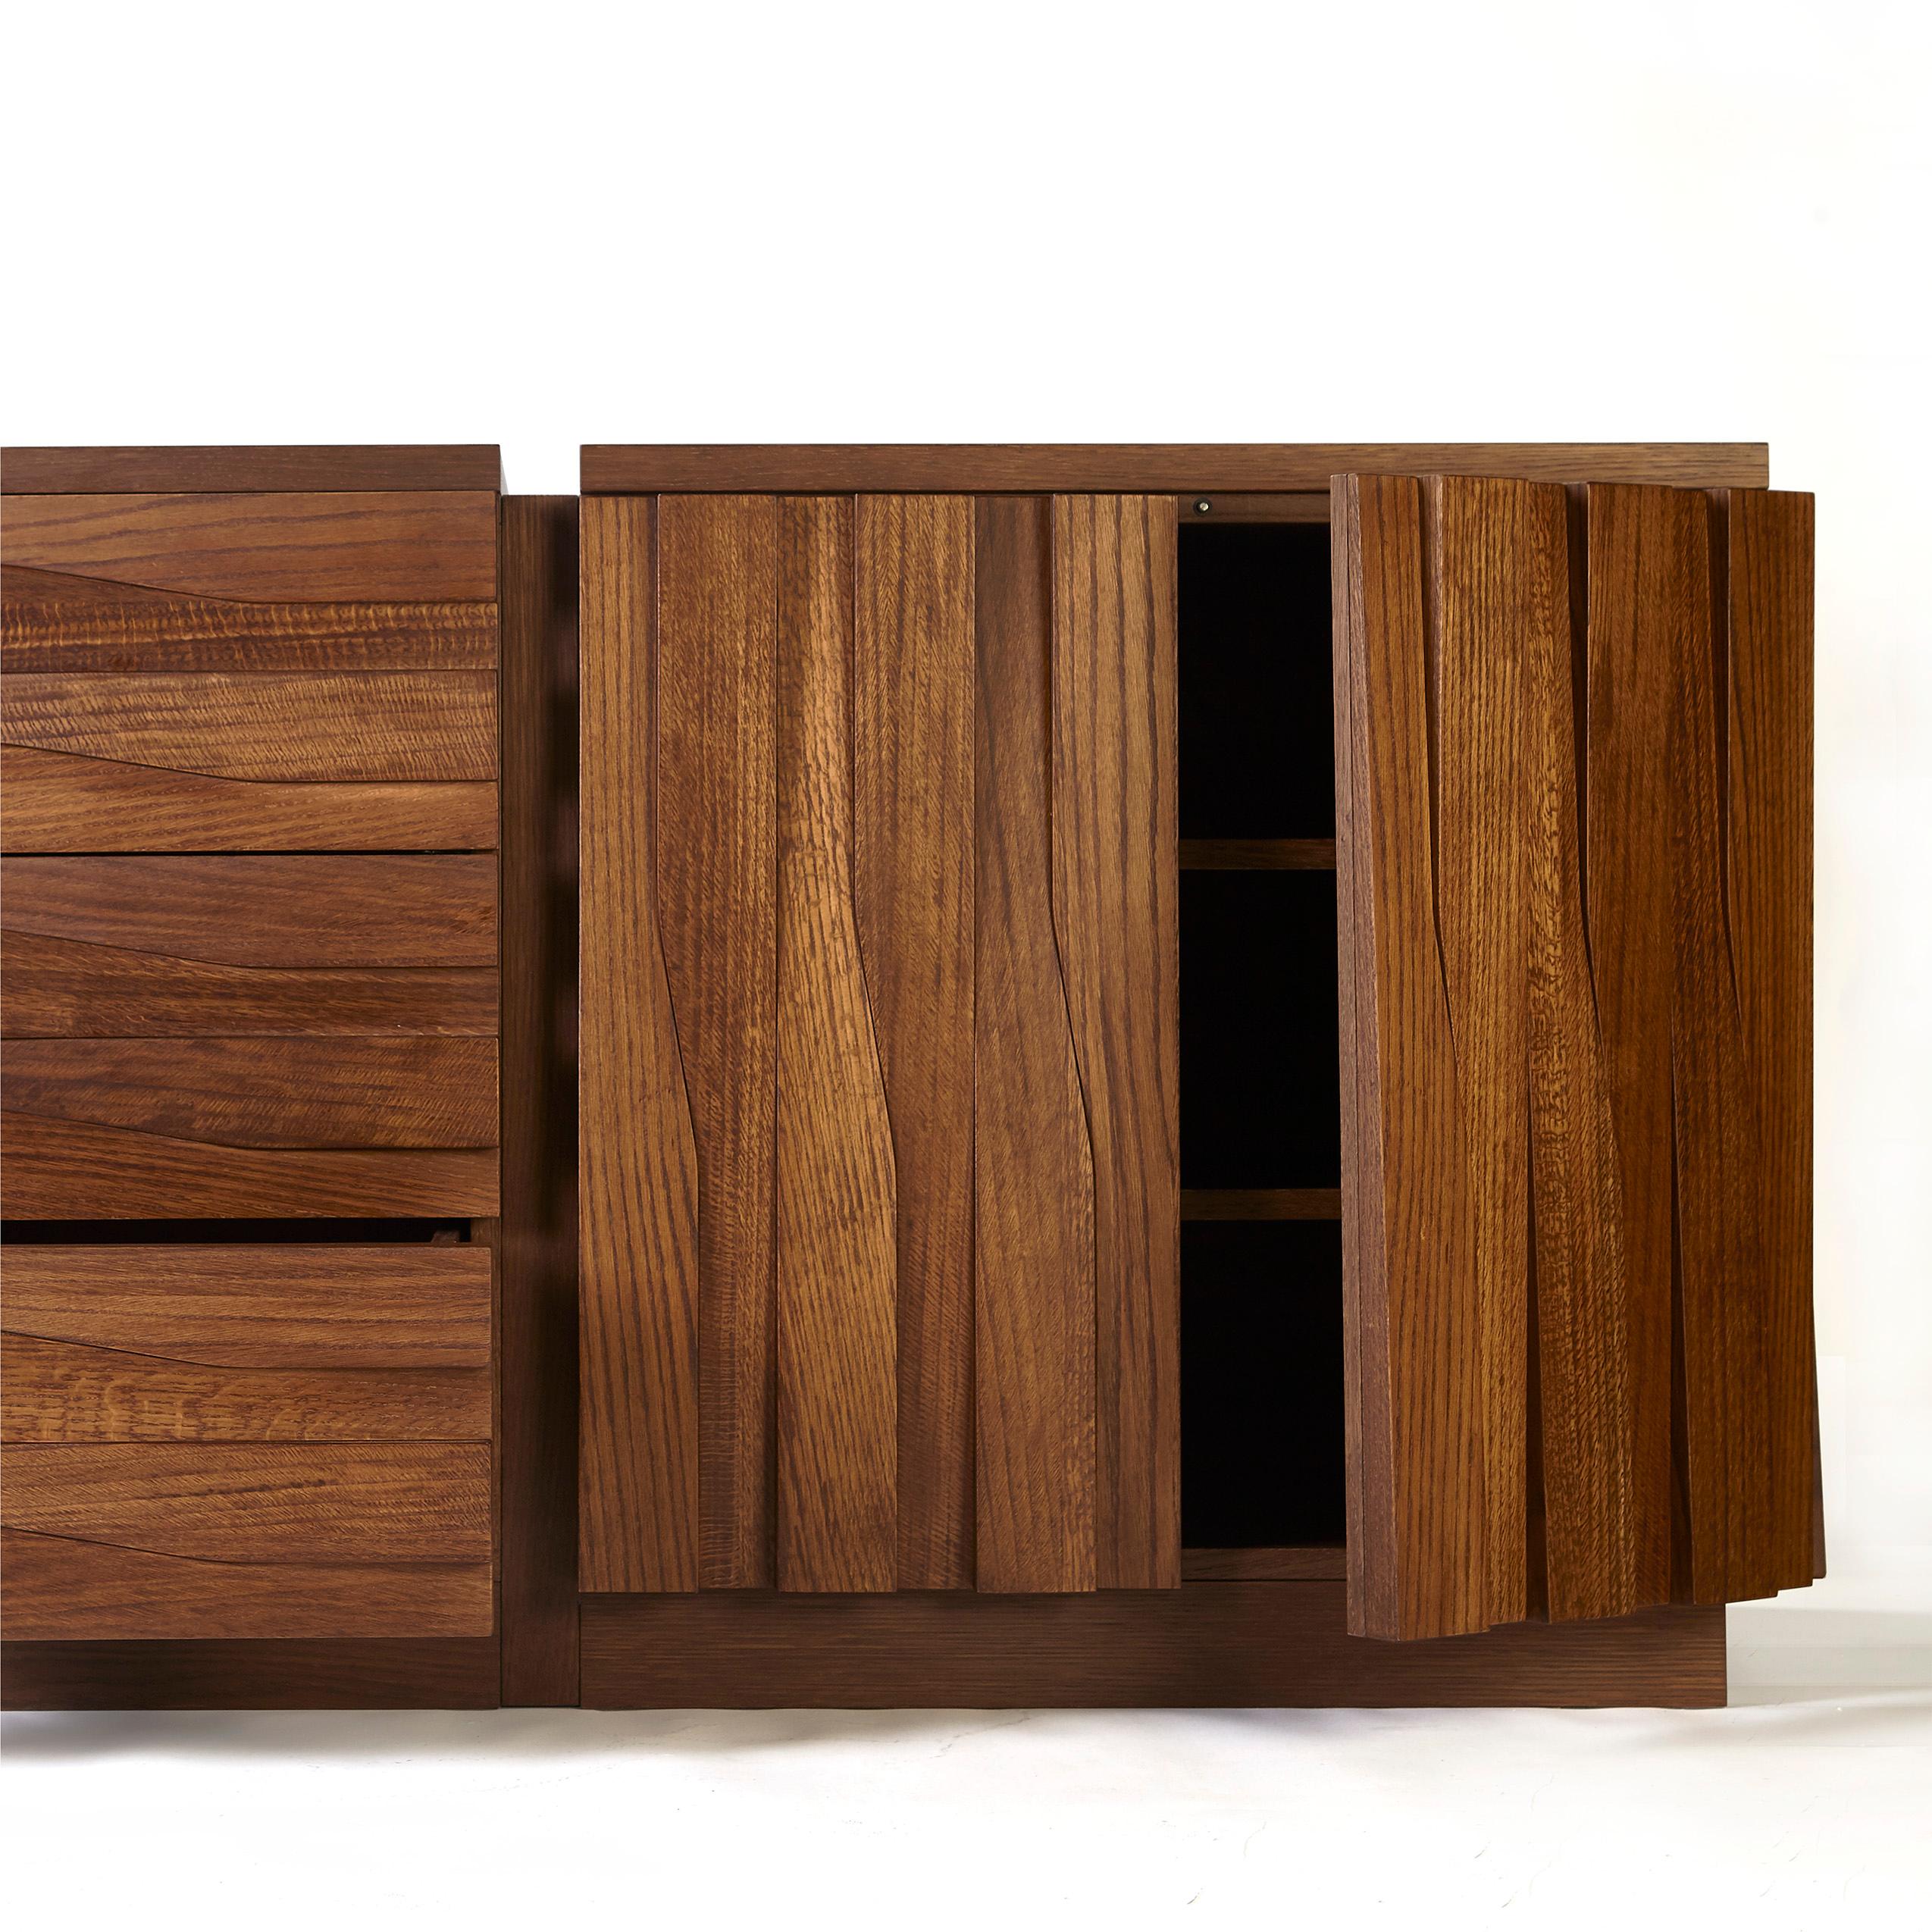 Jacaranda Sideboard, in Stained Oak Wood, Handcrafted in Portugal by Duistt

The Jacarandá sideboard, handcrafted by Portuguese artisans, was designed to pursuit the beauty of volume and form. Throughout an elegant, balanced and exquisite detailing